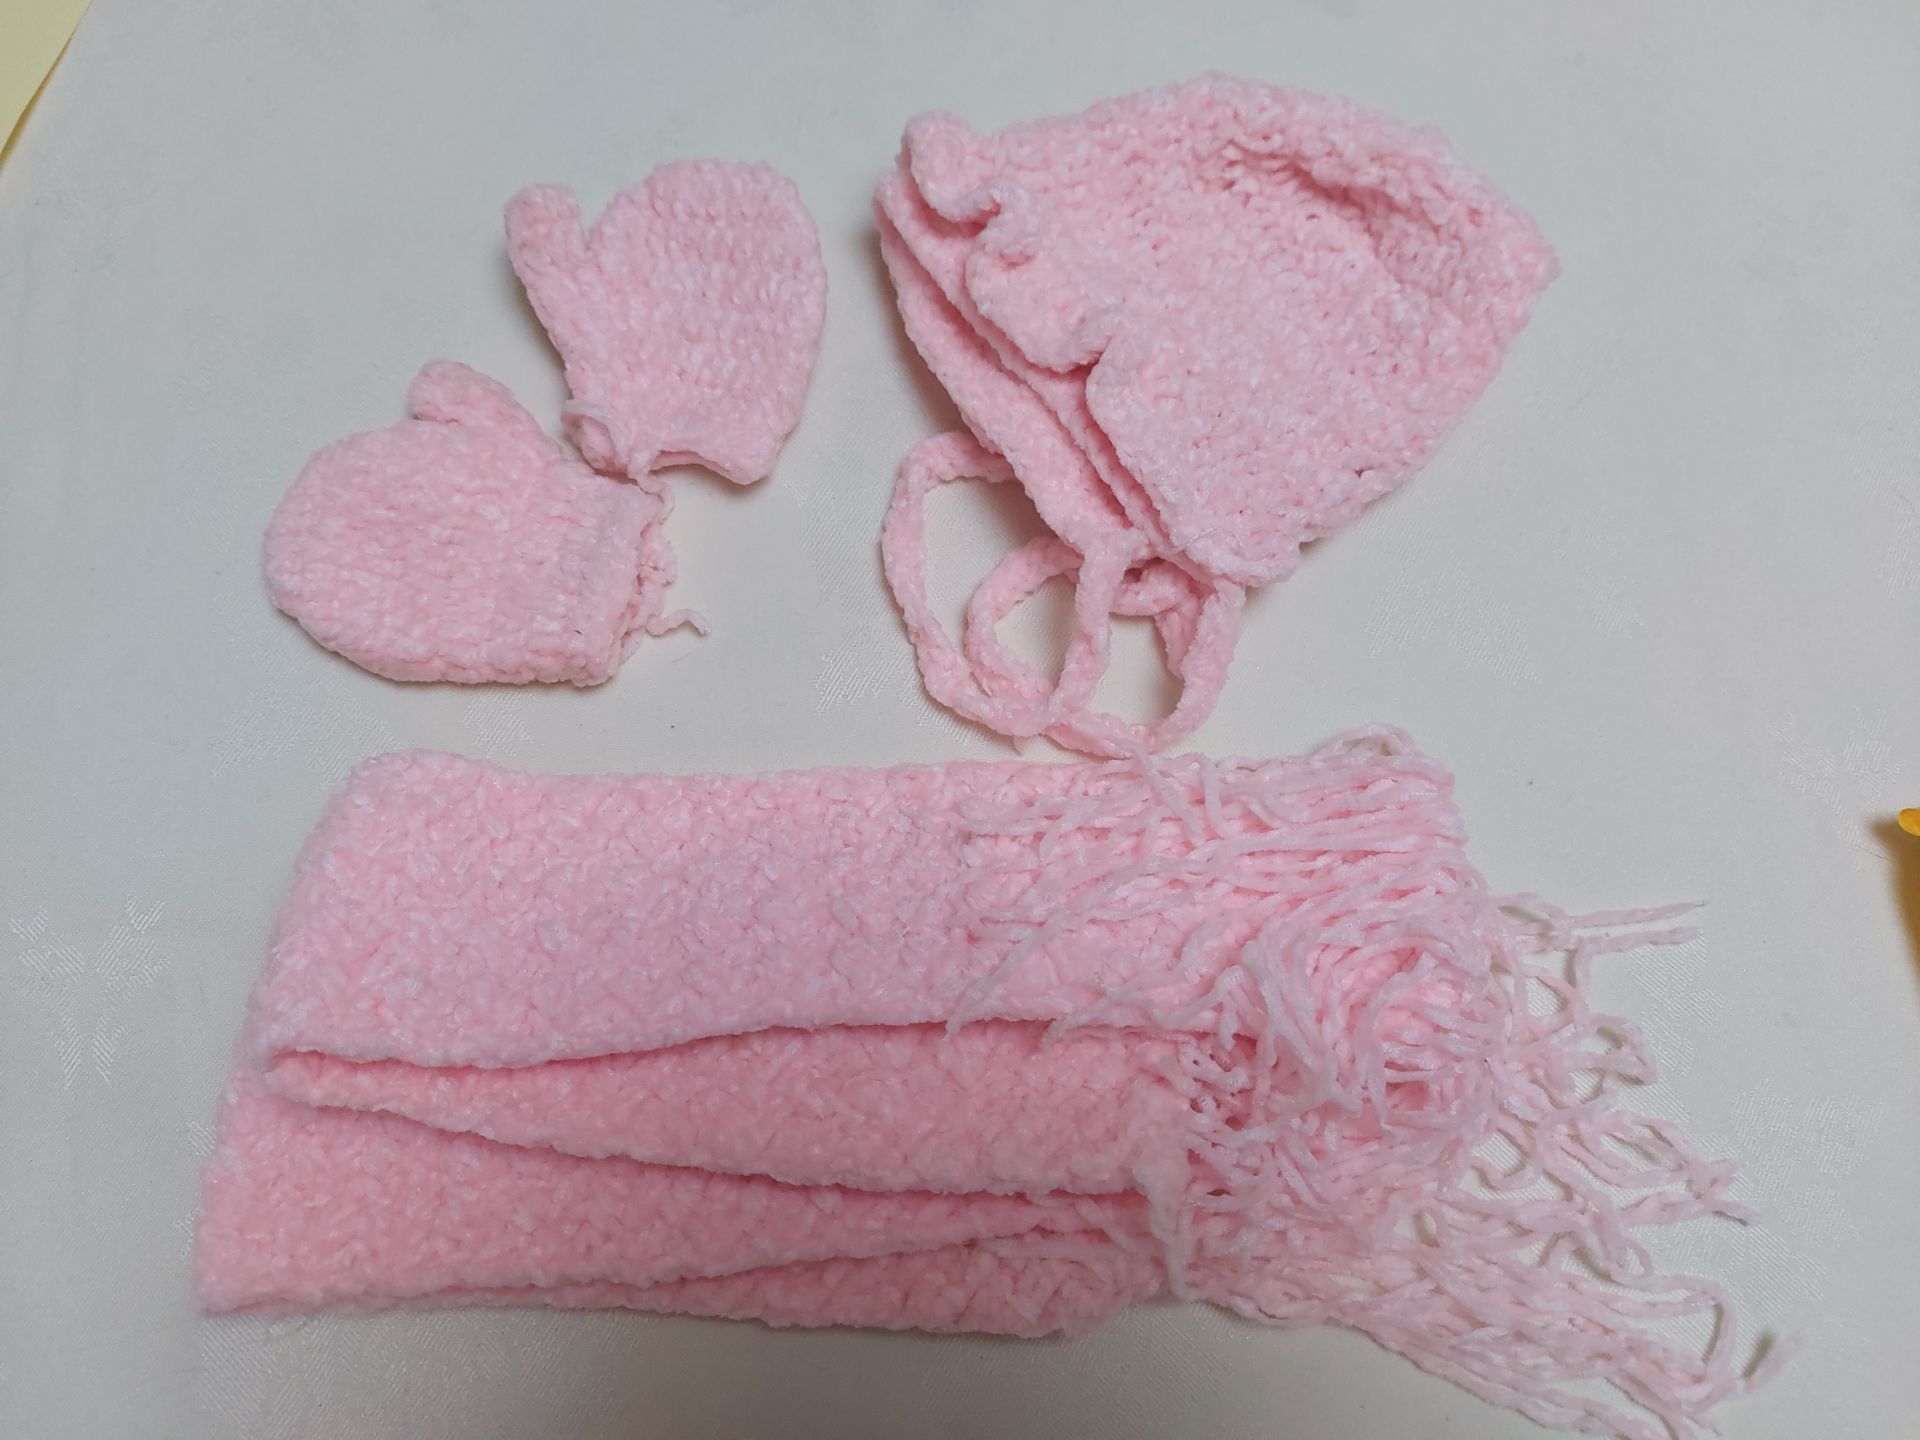 Pink and Blue Hats, Scarves and Gloves - Min 15 Items - Image 2 of 3